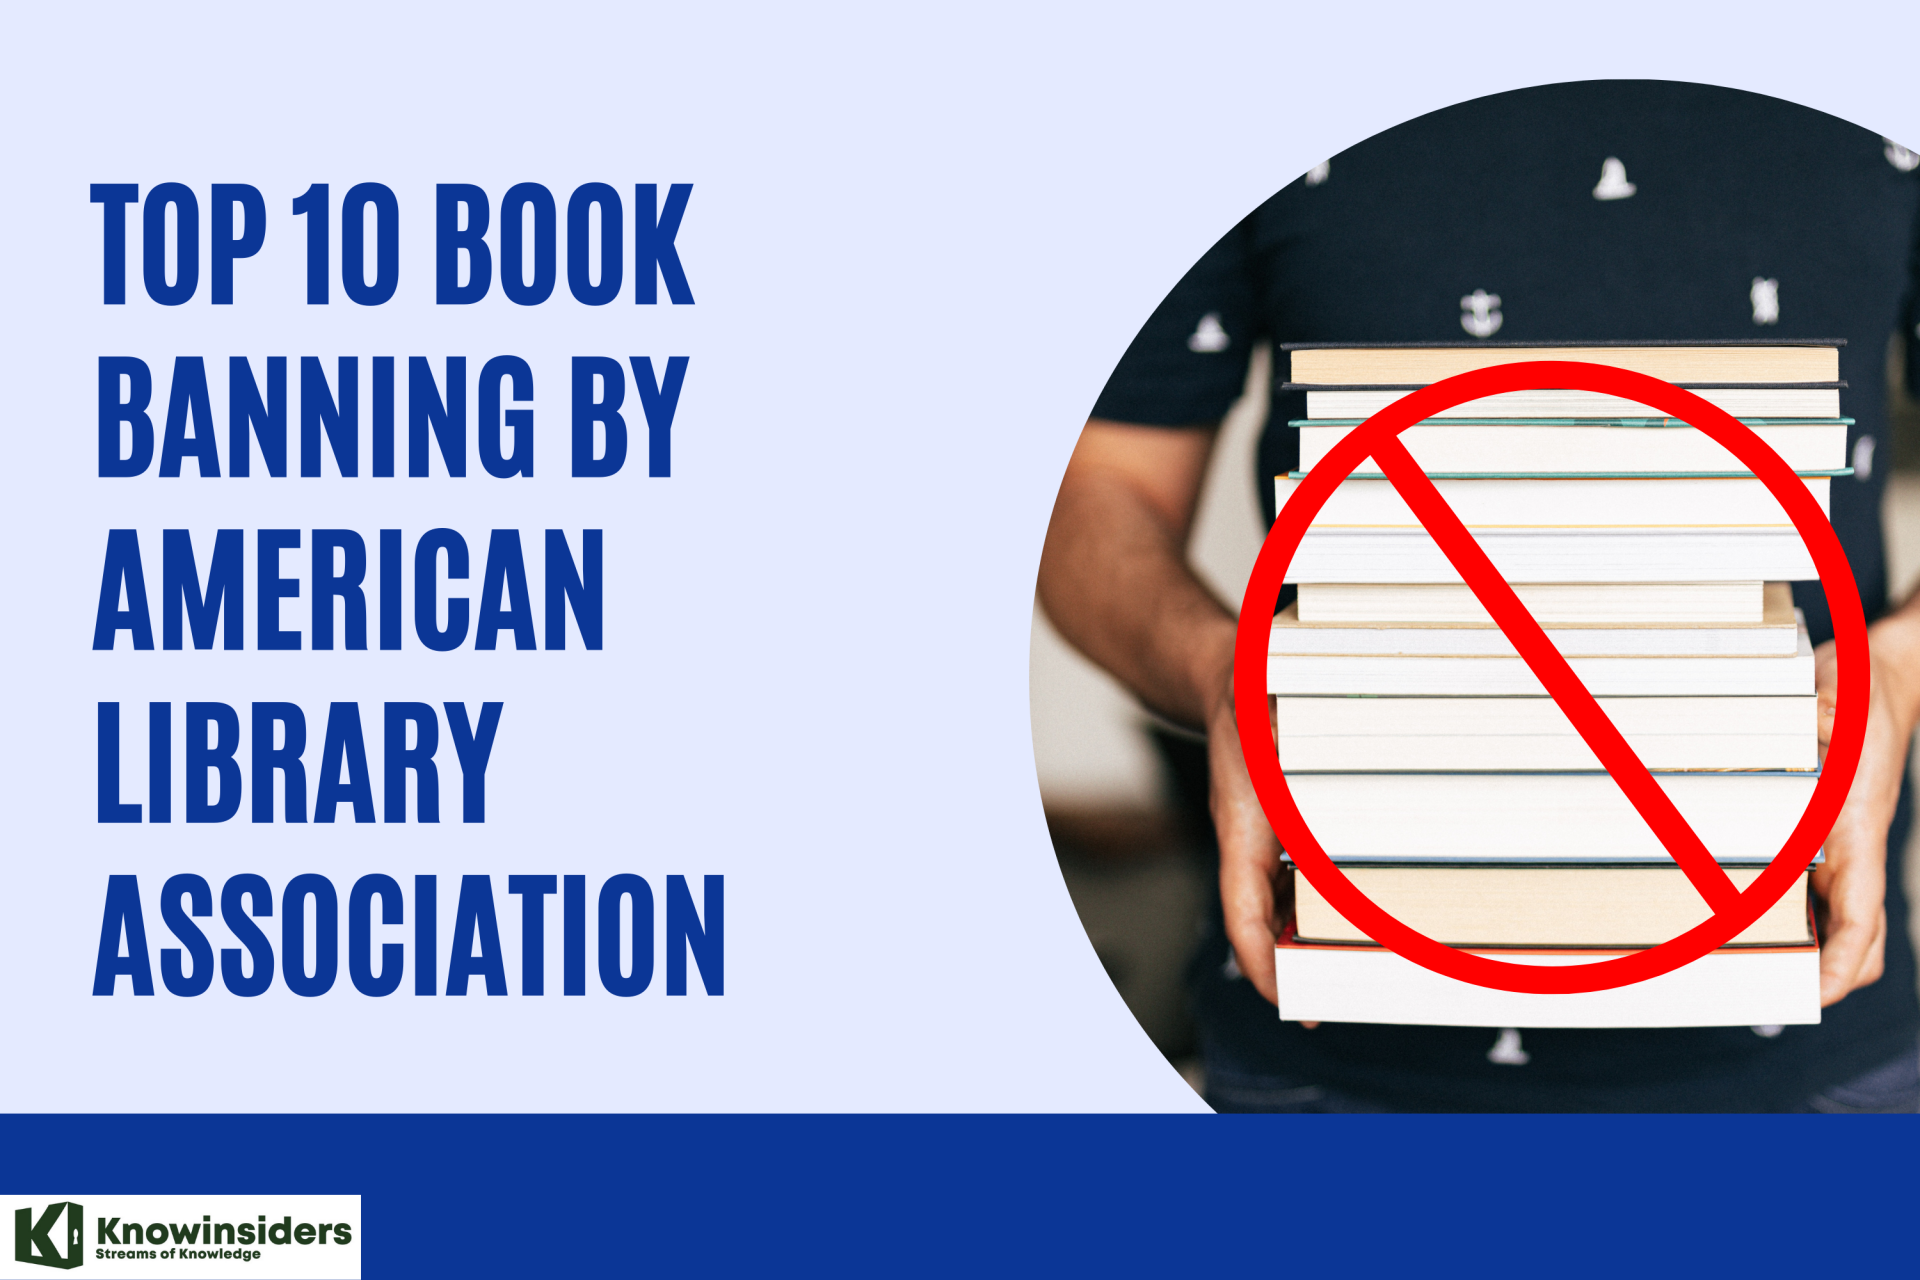 What's in the 10 Books Banned by American Library Association?